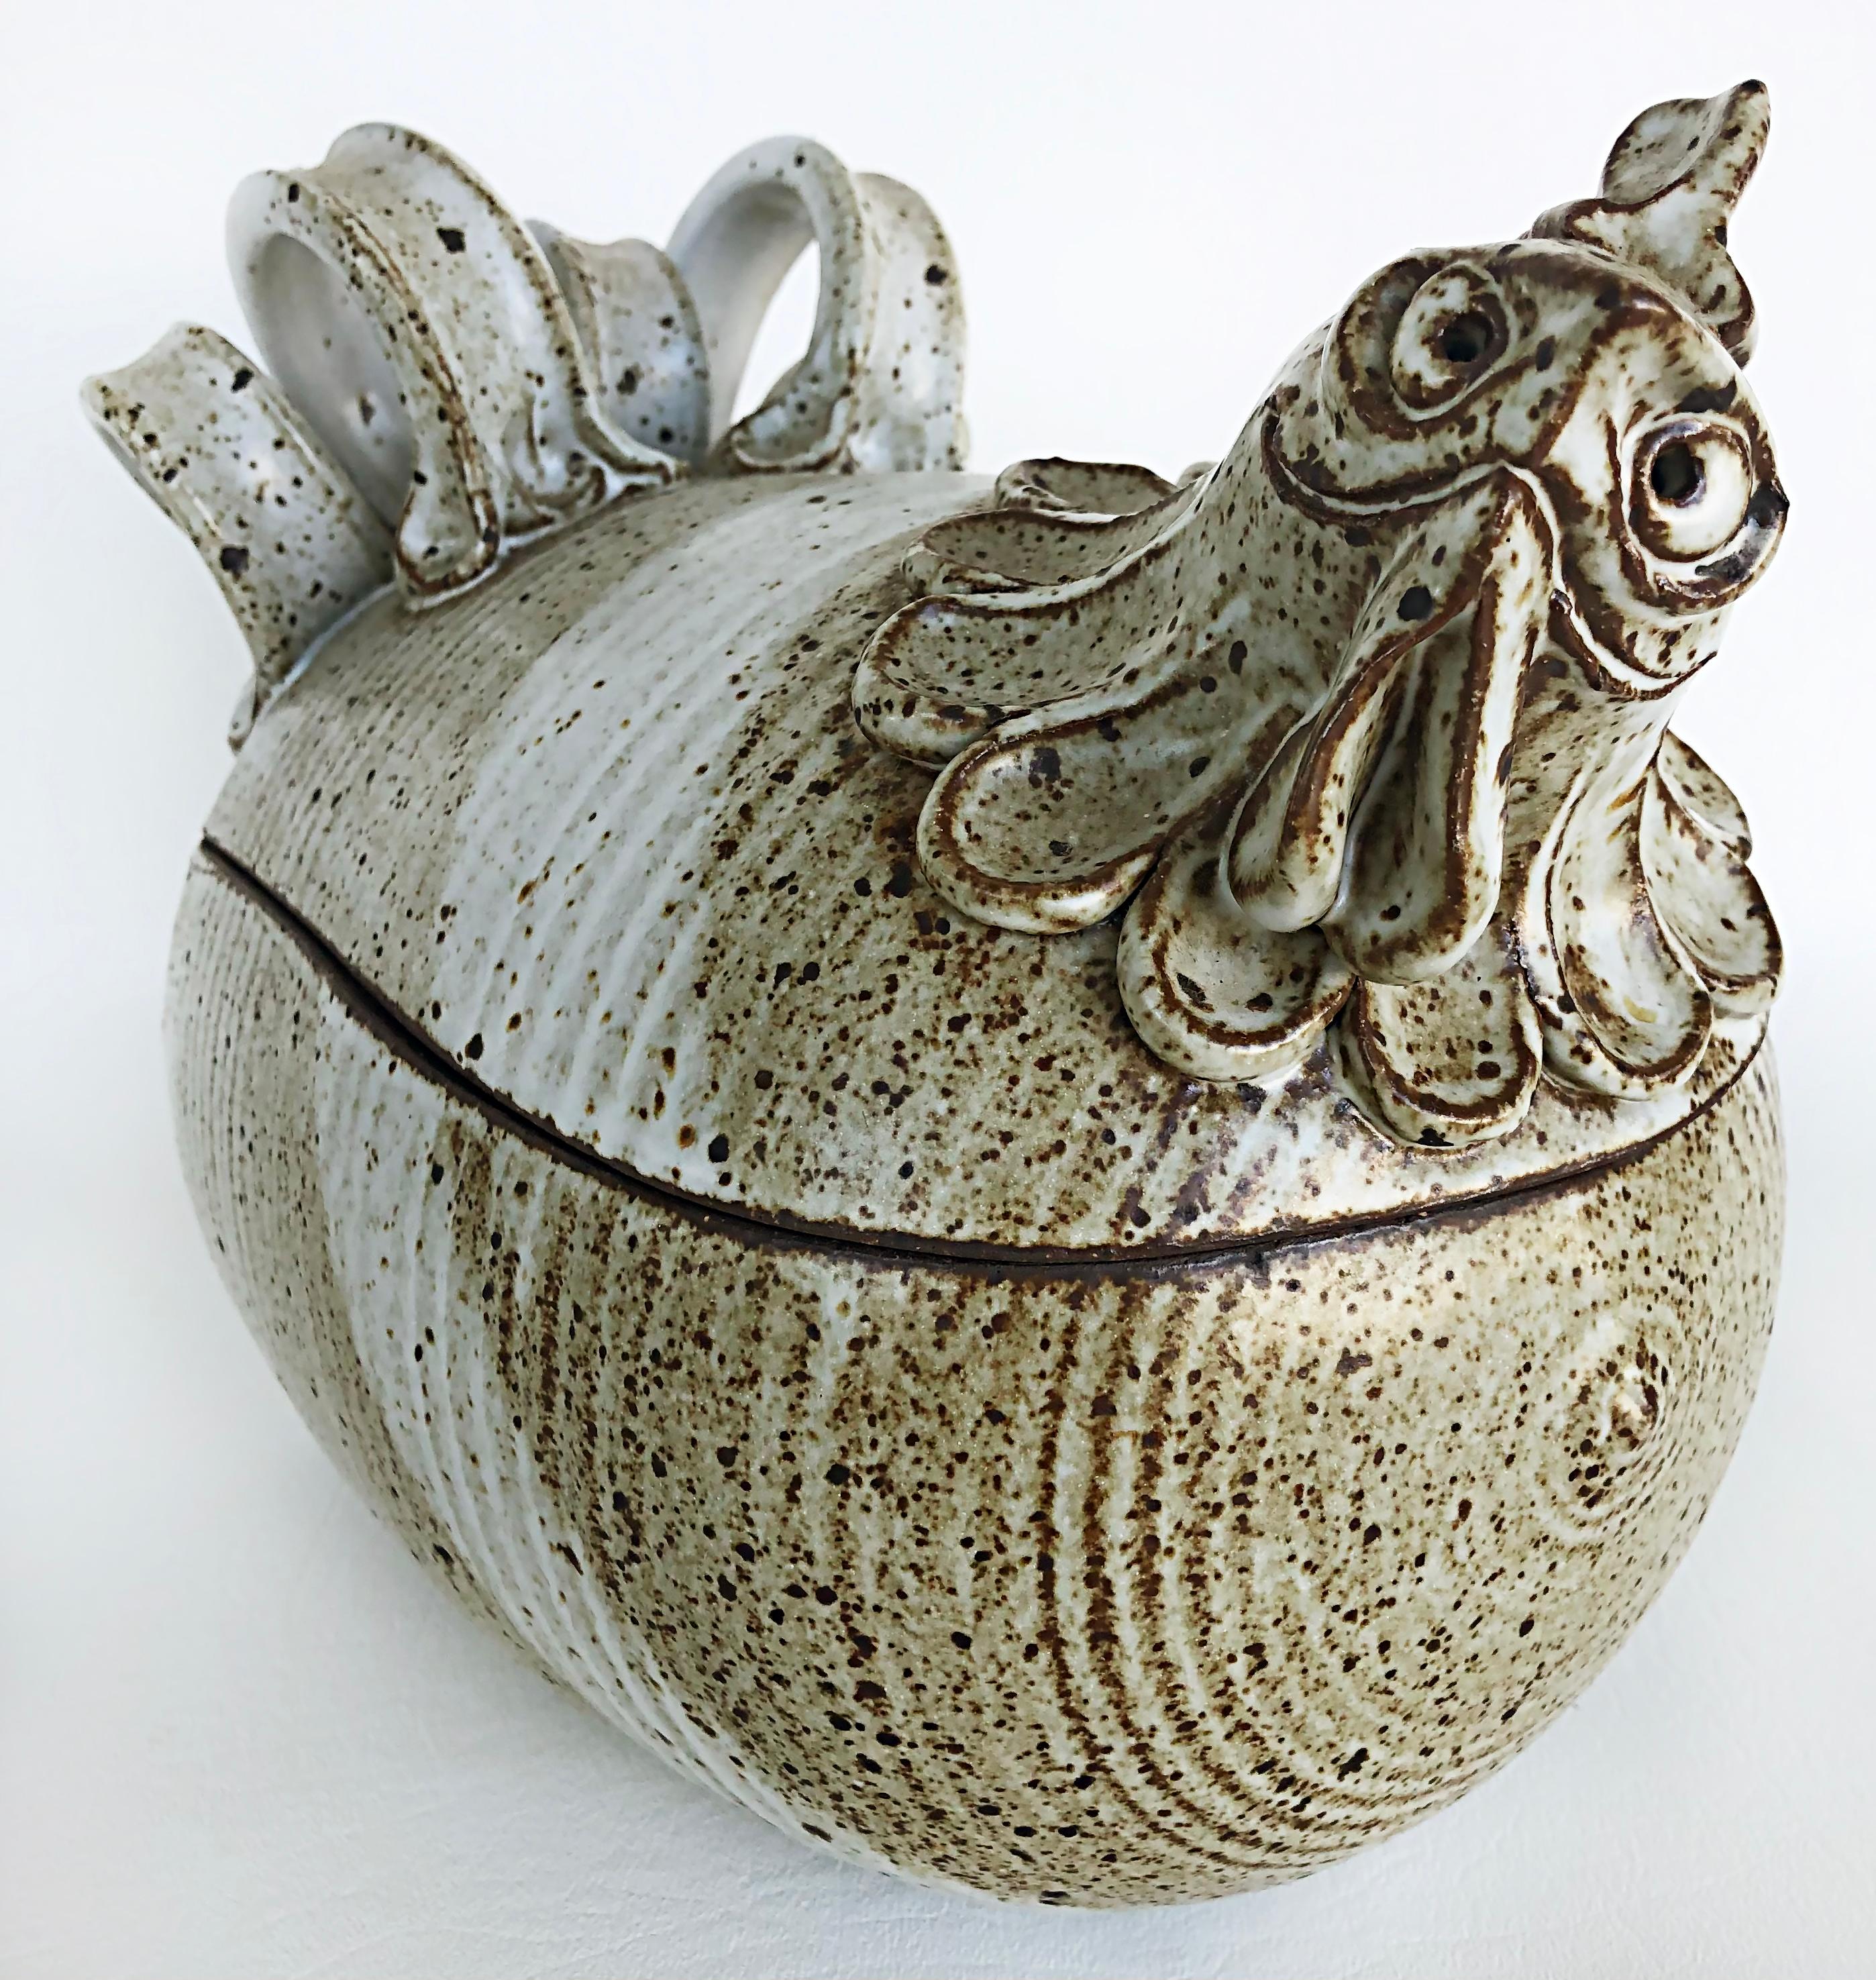 Vintage covered ceramic chicken Tureen vessel, signed 

Offered for sale is a vintage hand-made pottery stylized chicken tureen casserole finished in midcentury tone glazes. The side is marked with an illegible monogram as shown. This is a fun